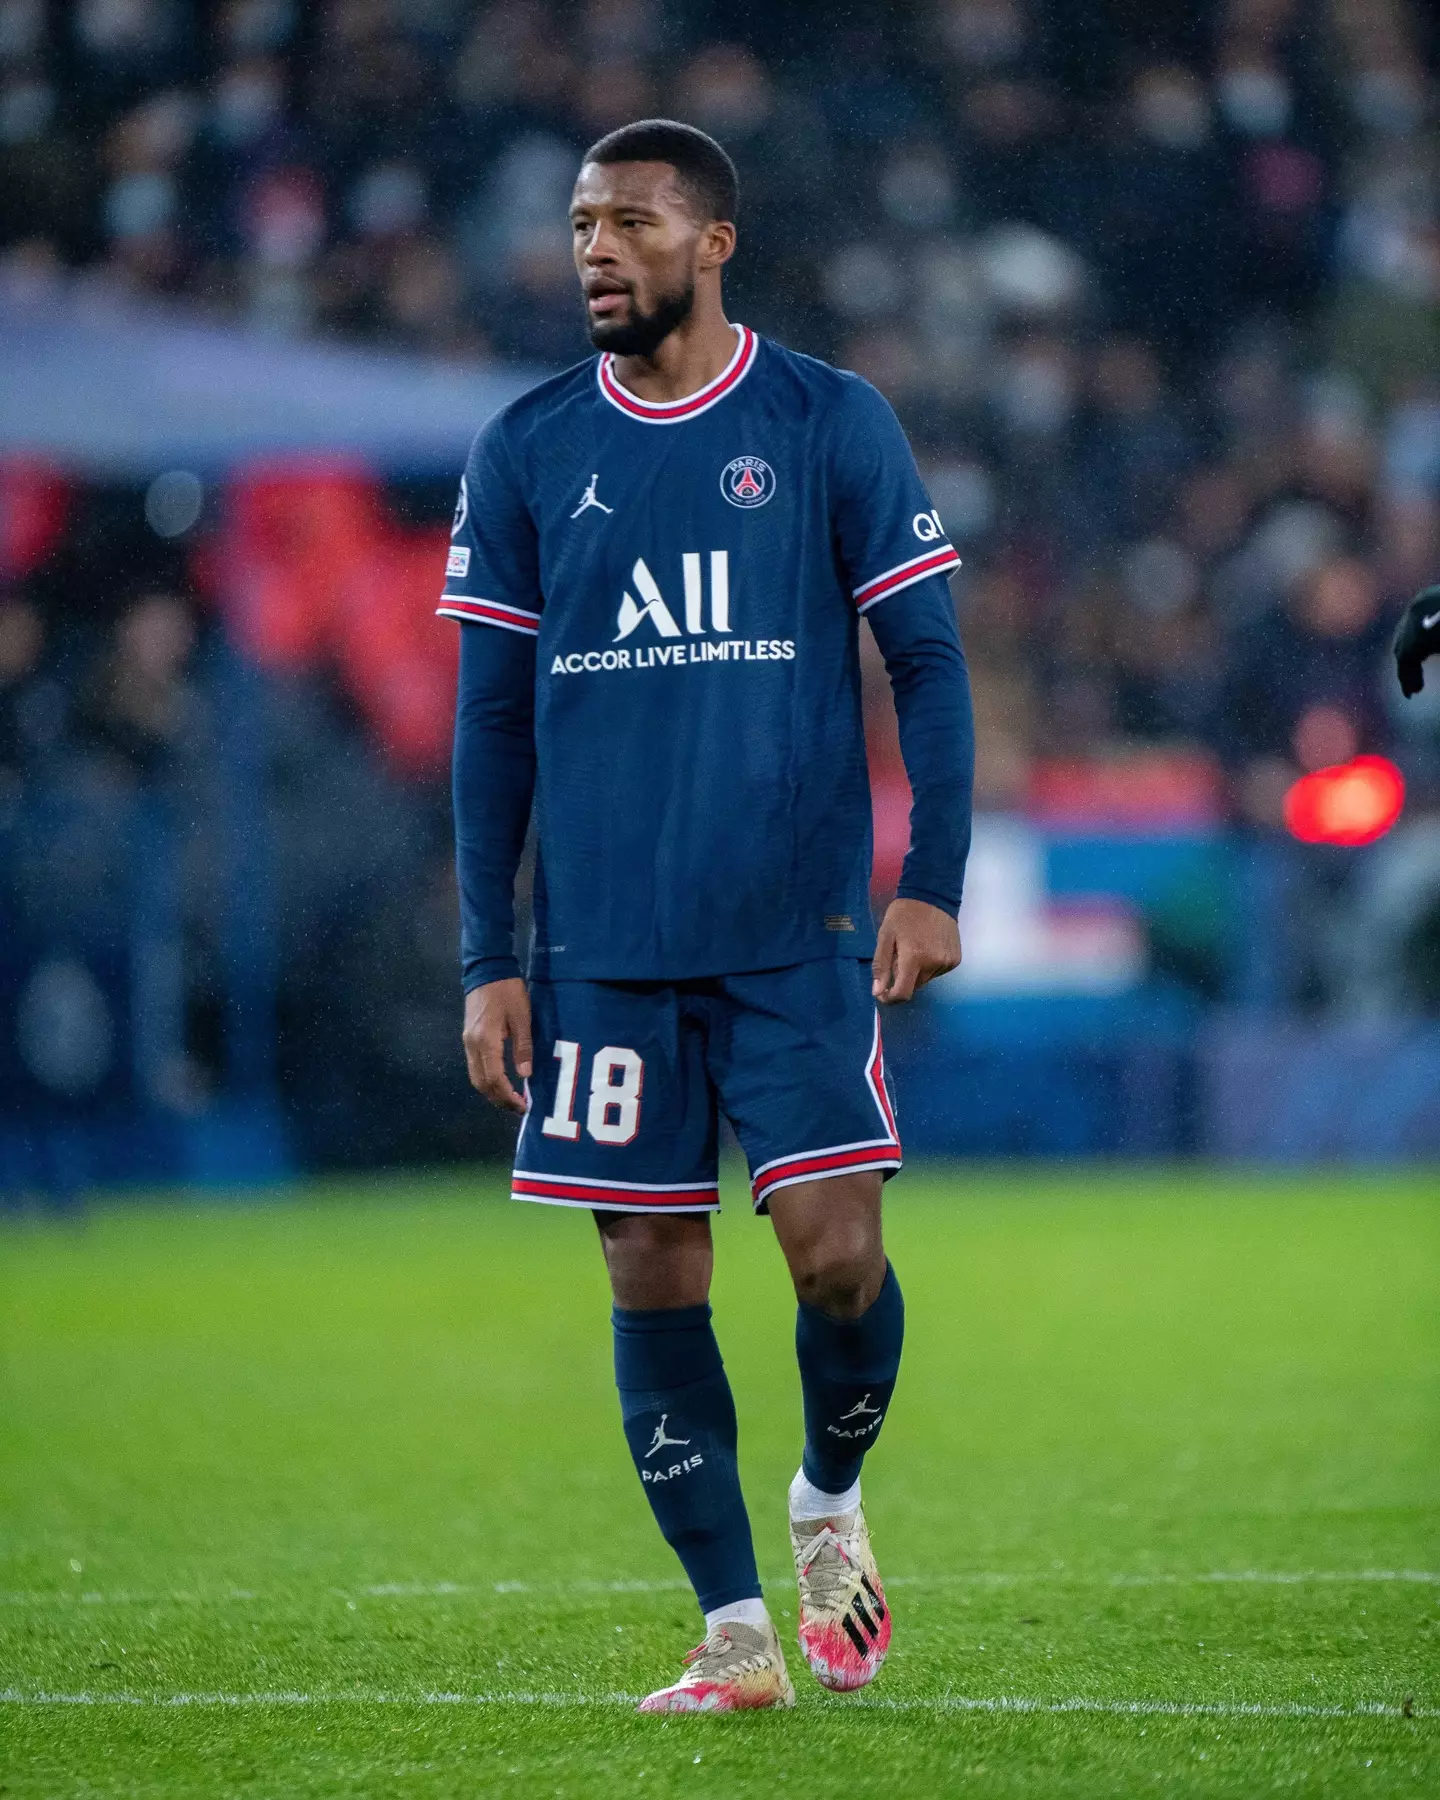 Wijnaldum has previously admitted he is "not completely happy" in Paris (Image: Alamy)